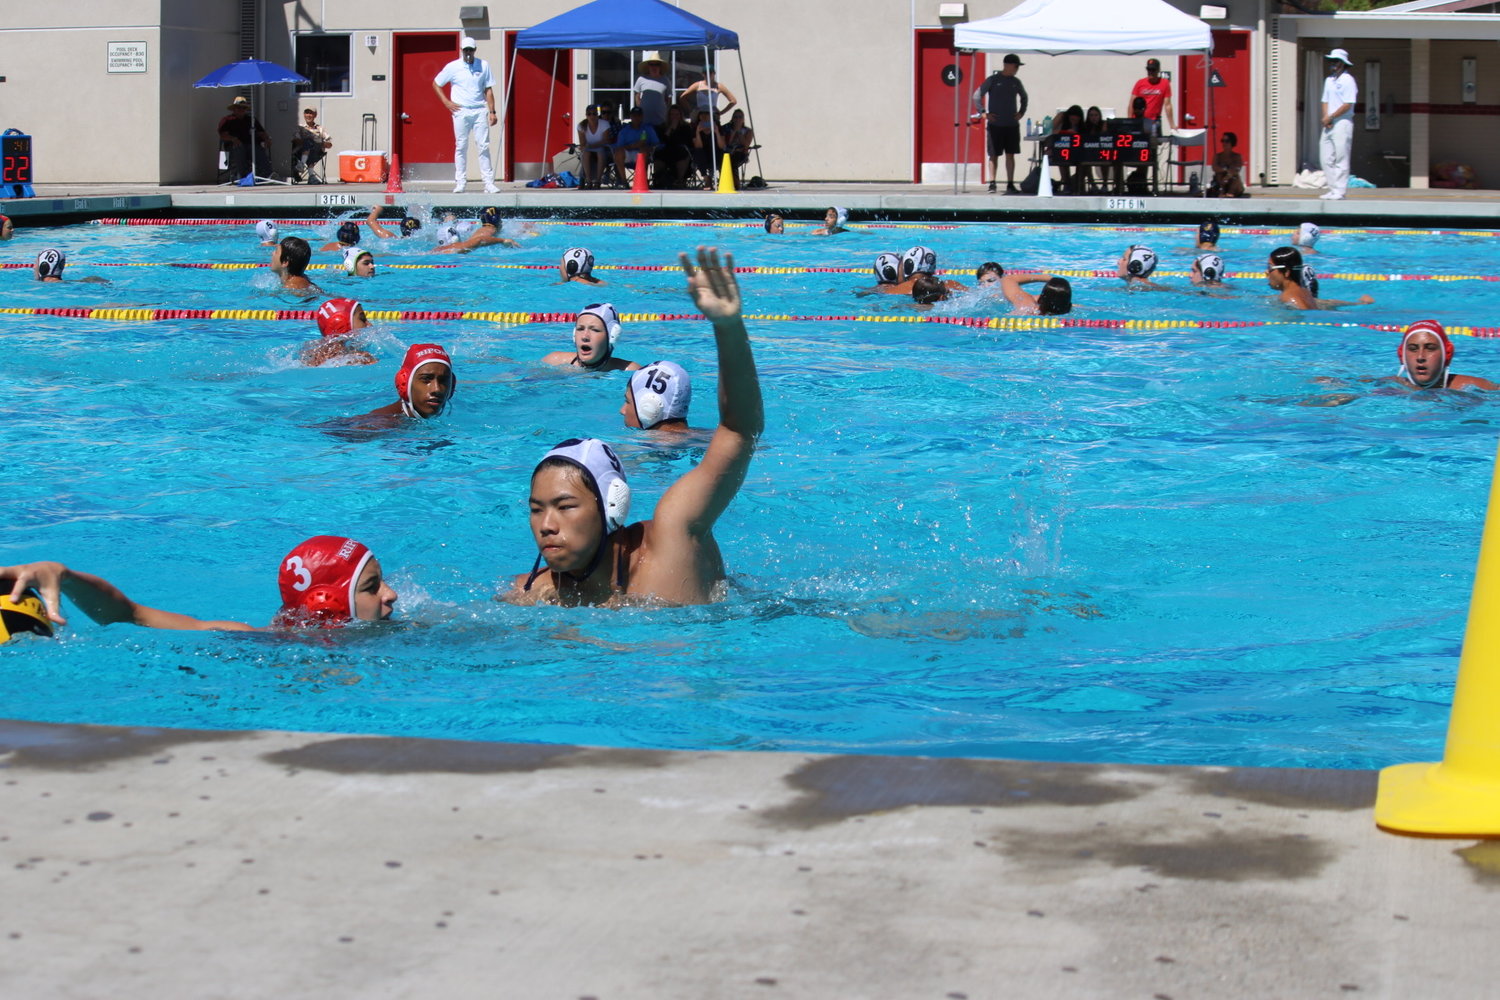 Lucas Xiao Lu, number 9, reached over an opponent during a water polo match in San Jose during the 2022 Summer Junior Olympics.